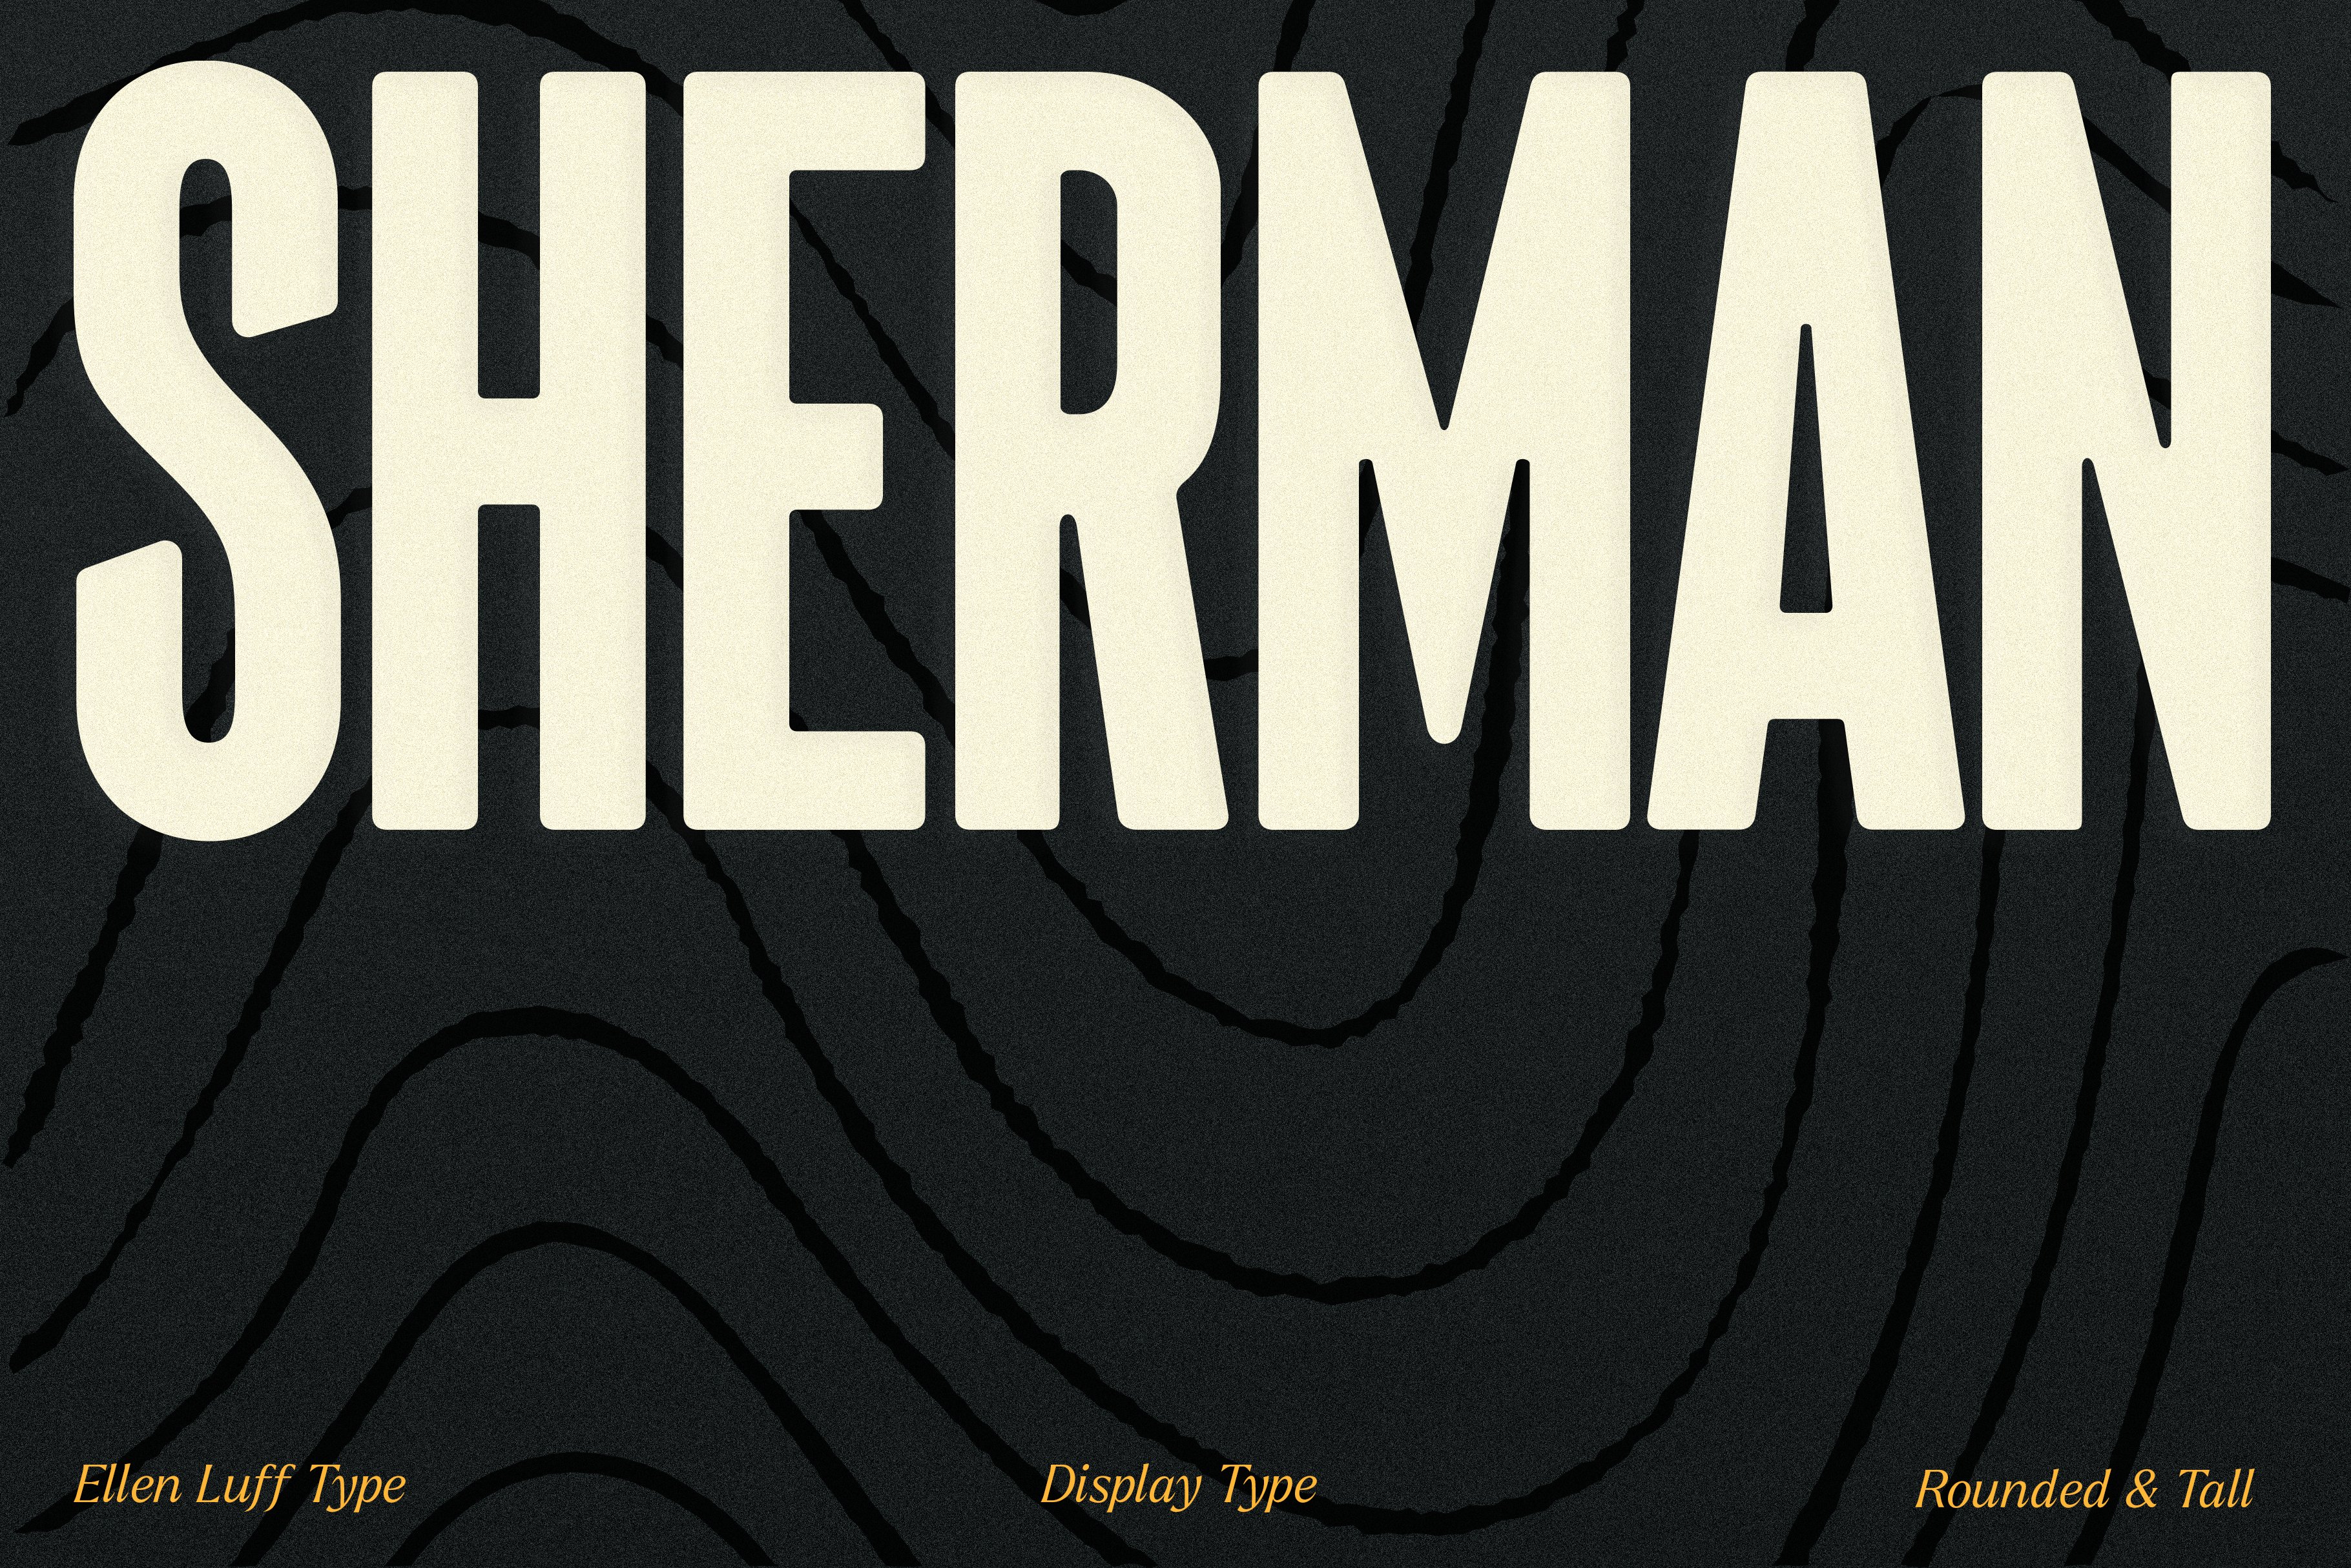 Sherman Typeface cover image.